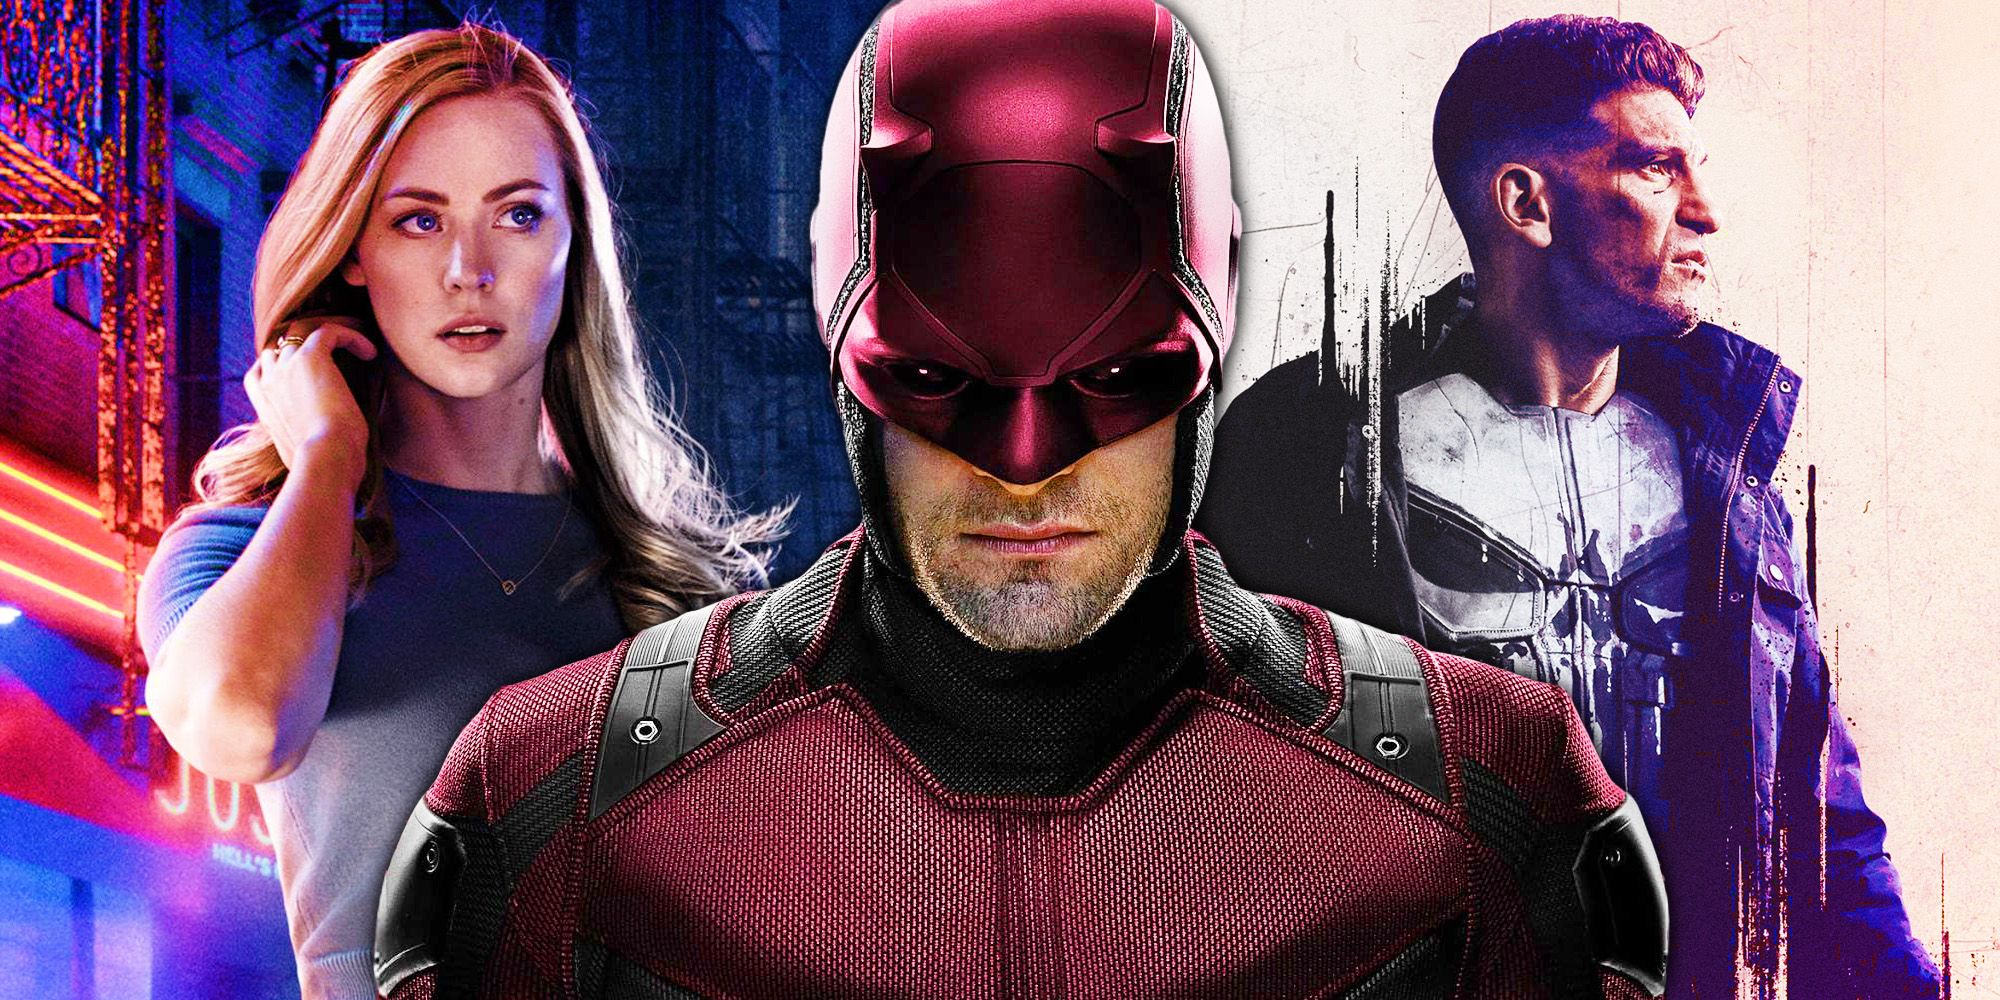 Charlie Cox as Daredevil between Deborah Ann Woll and Jon Bernthal as Karen and The Punisher from Netflix's Daredevil